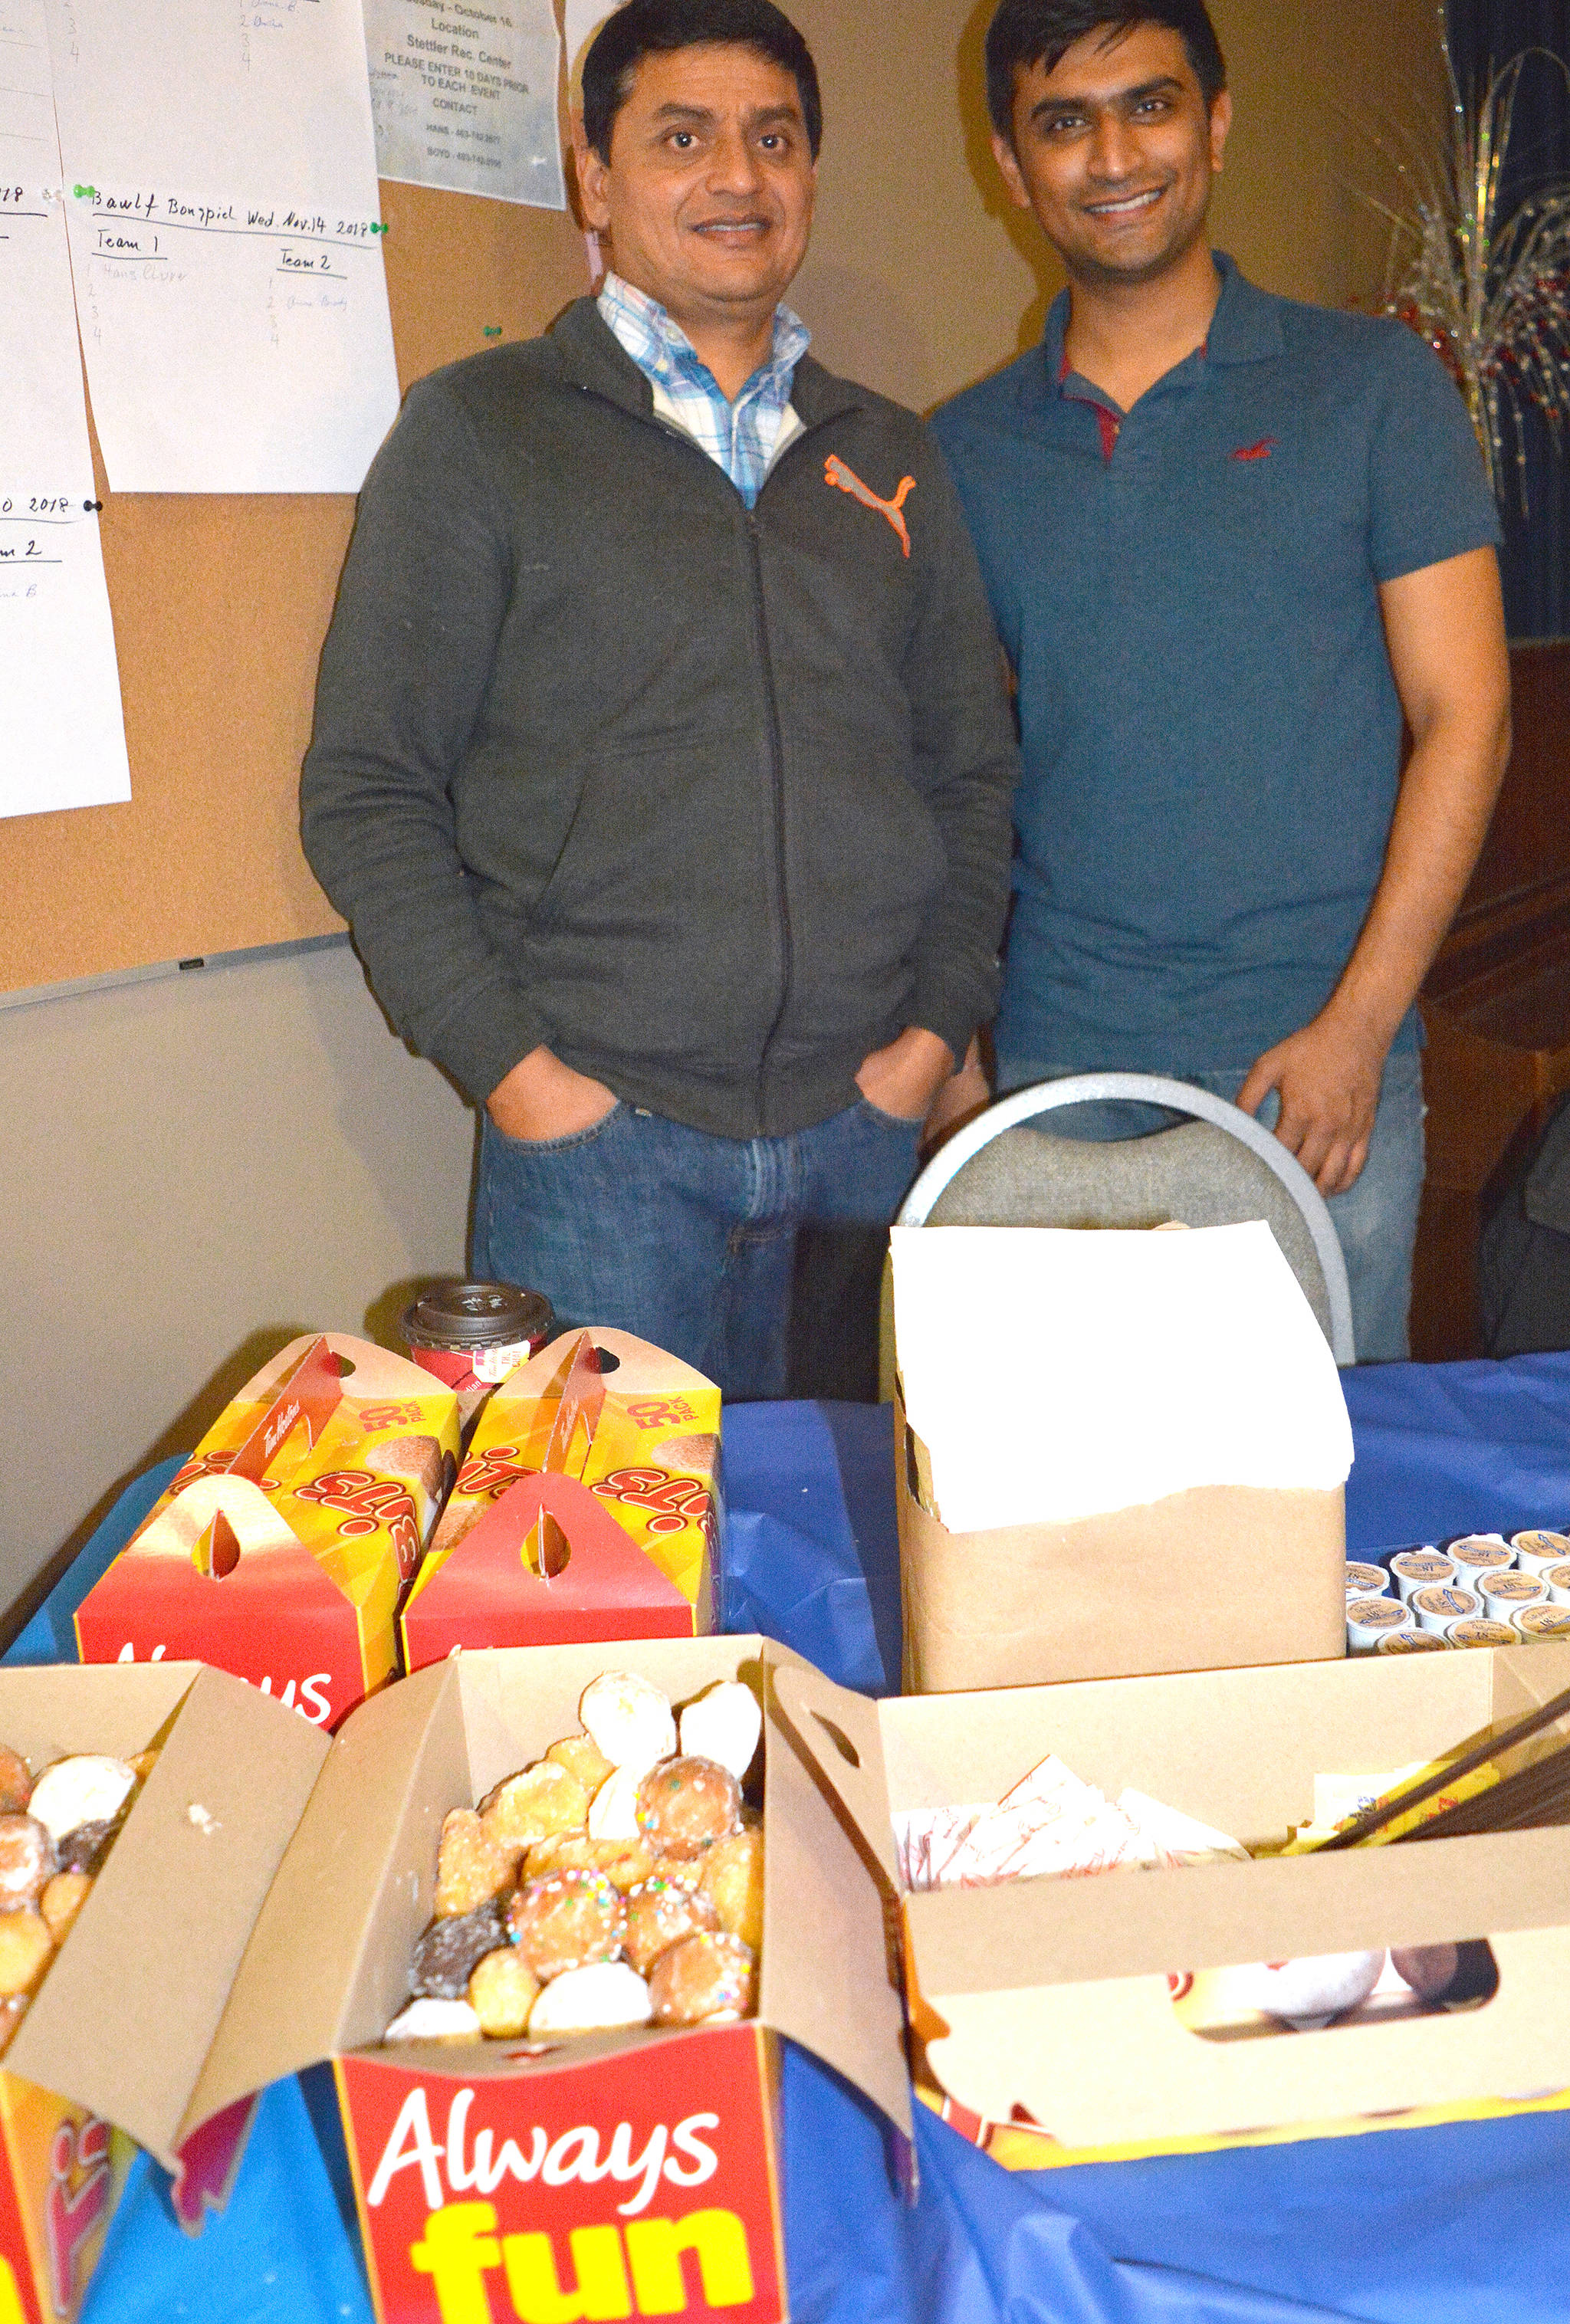 Ritesh Patel, left, and Dhouv Patel from Stettler’s Tim Hortons had hot coffee, Tim bits and other treats for participants of Taste of Stettler at the Hub on Sept. 21.                                Lisa Joy/Stettler Independent